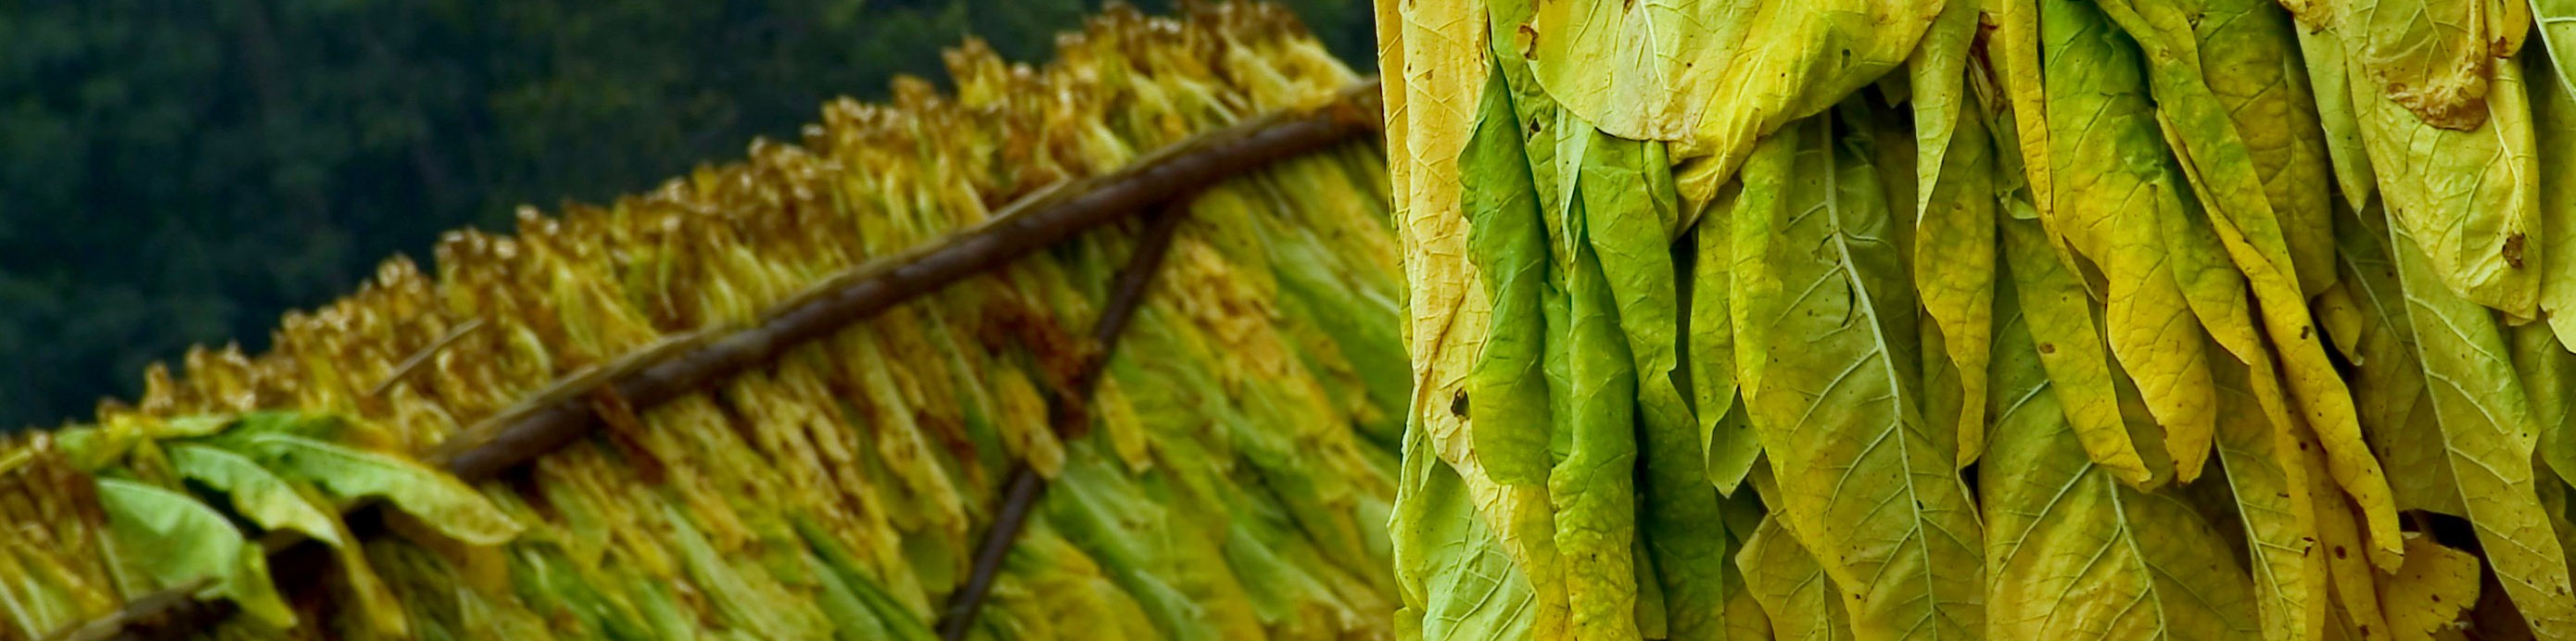 Hanging tobacco leaves - curing tobacco